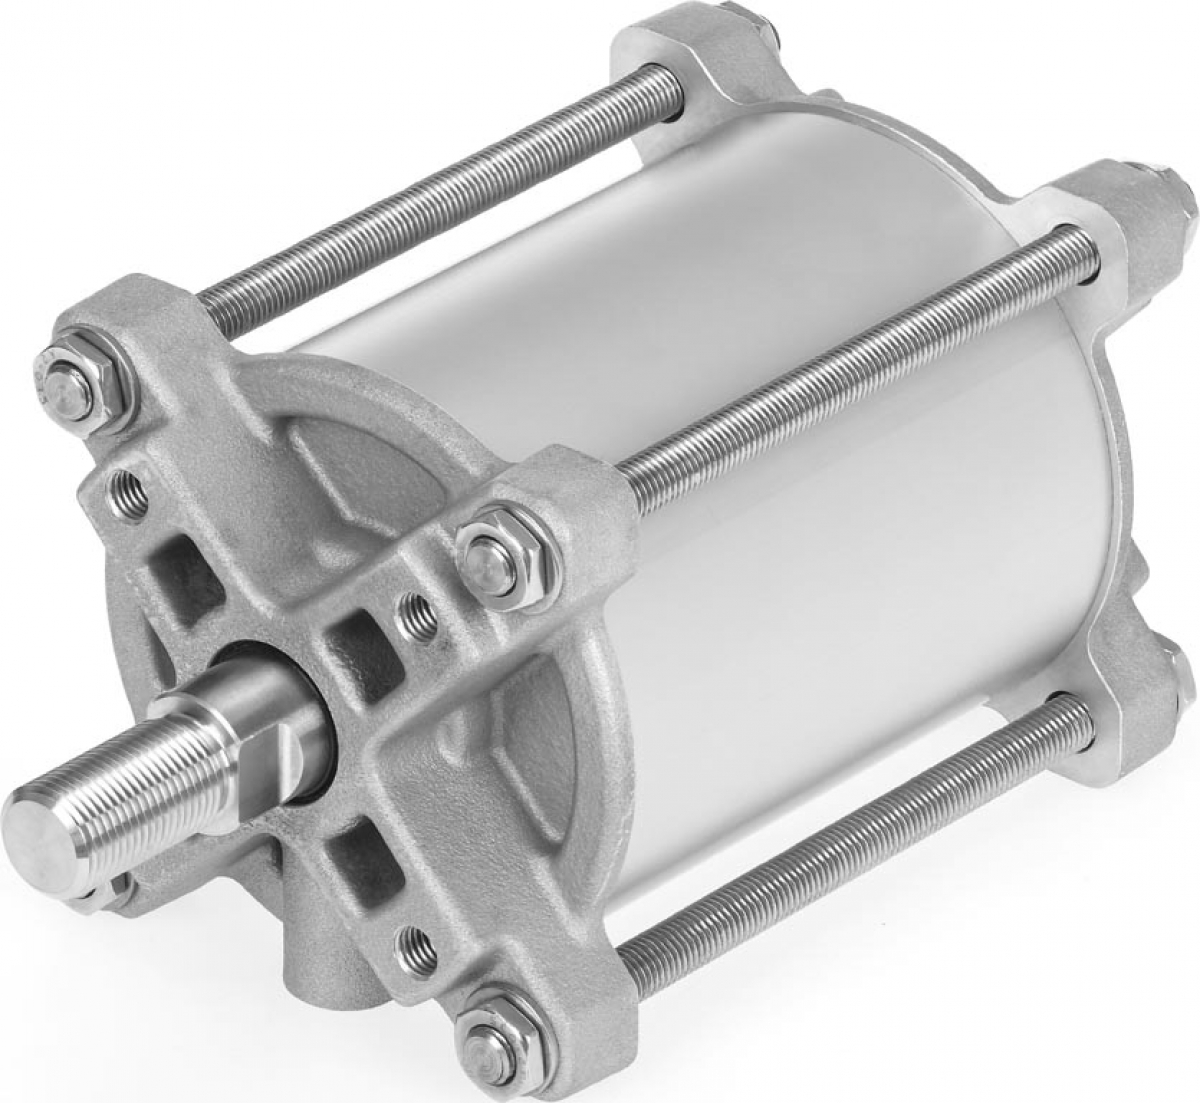 Freedom of choice: The double-acting pneumatic linear actuator DFPC from Festo for process valves is available either as low-cost, preconfigured standard variants from stock or as individually configured versions. (Photo: Festo SE & Co. KG)